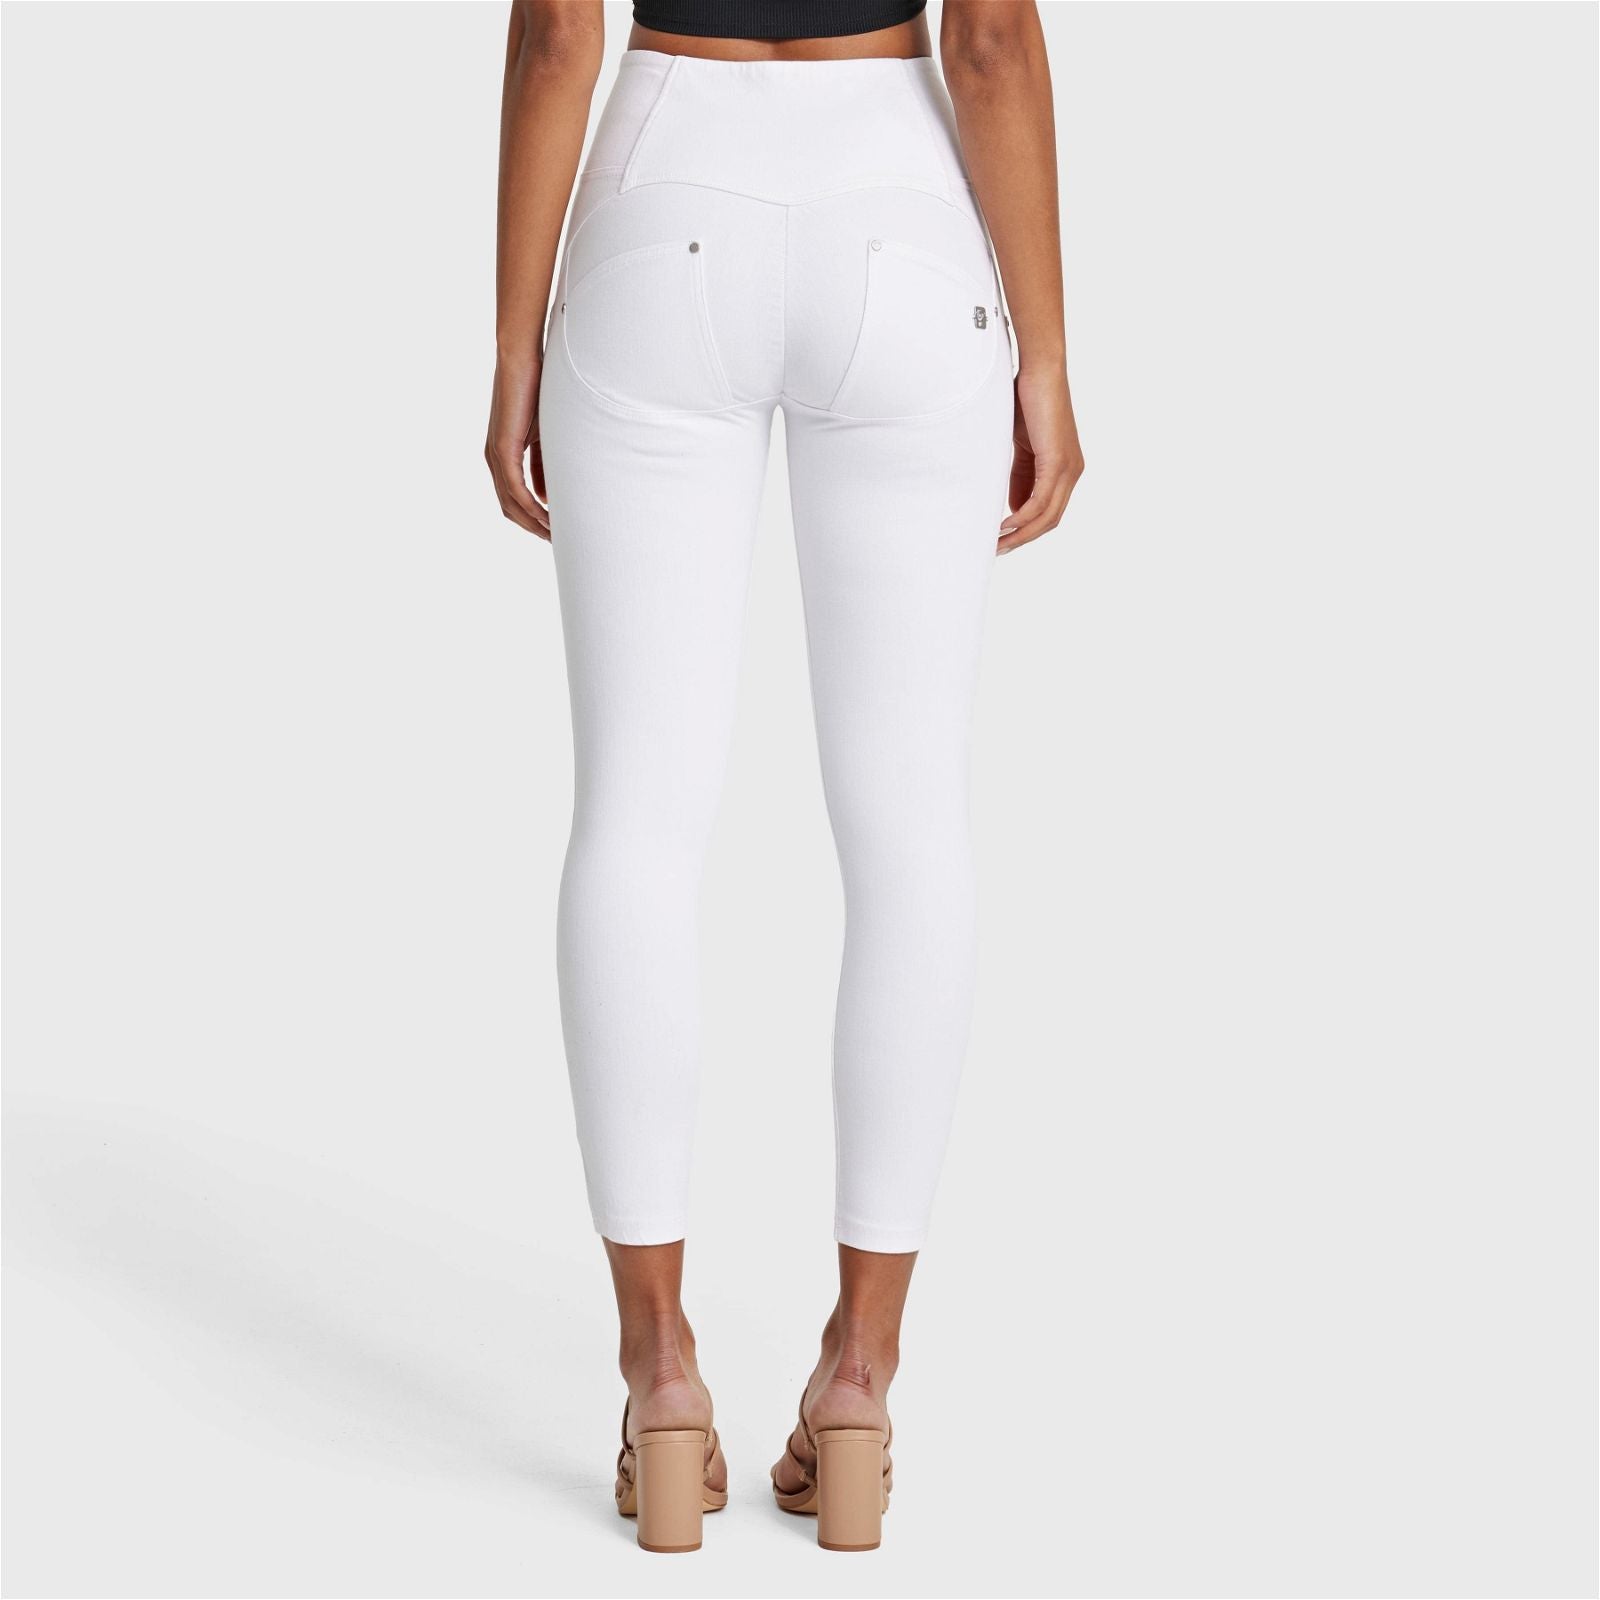 WR.UP® SNUG Distressed Jeans - High Waisted - 7/8 Length - White 3